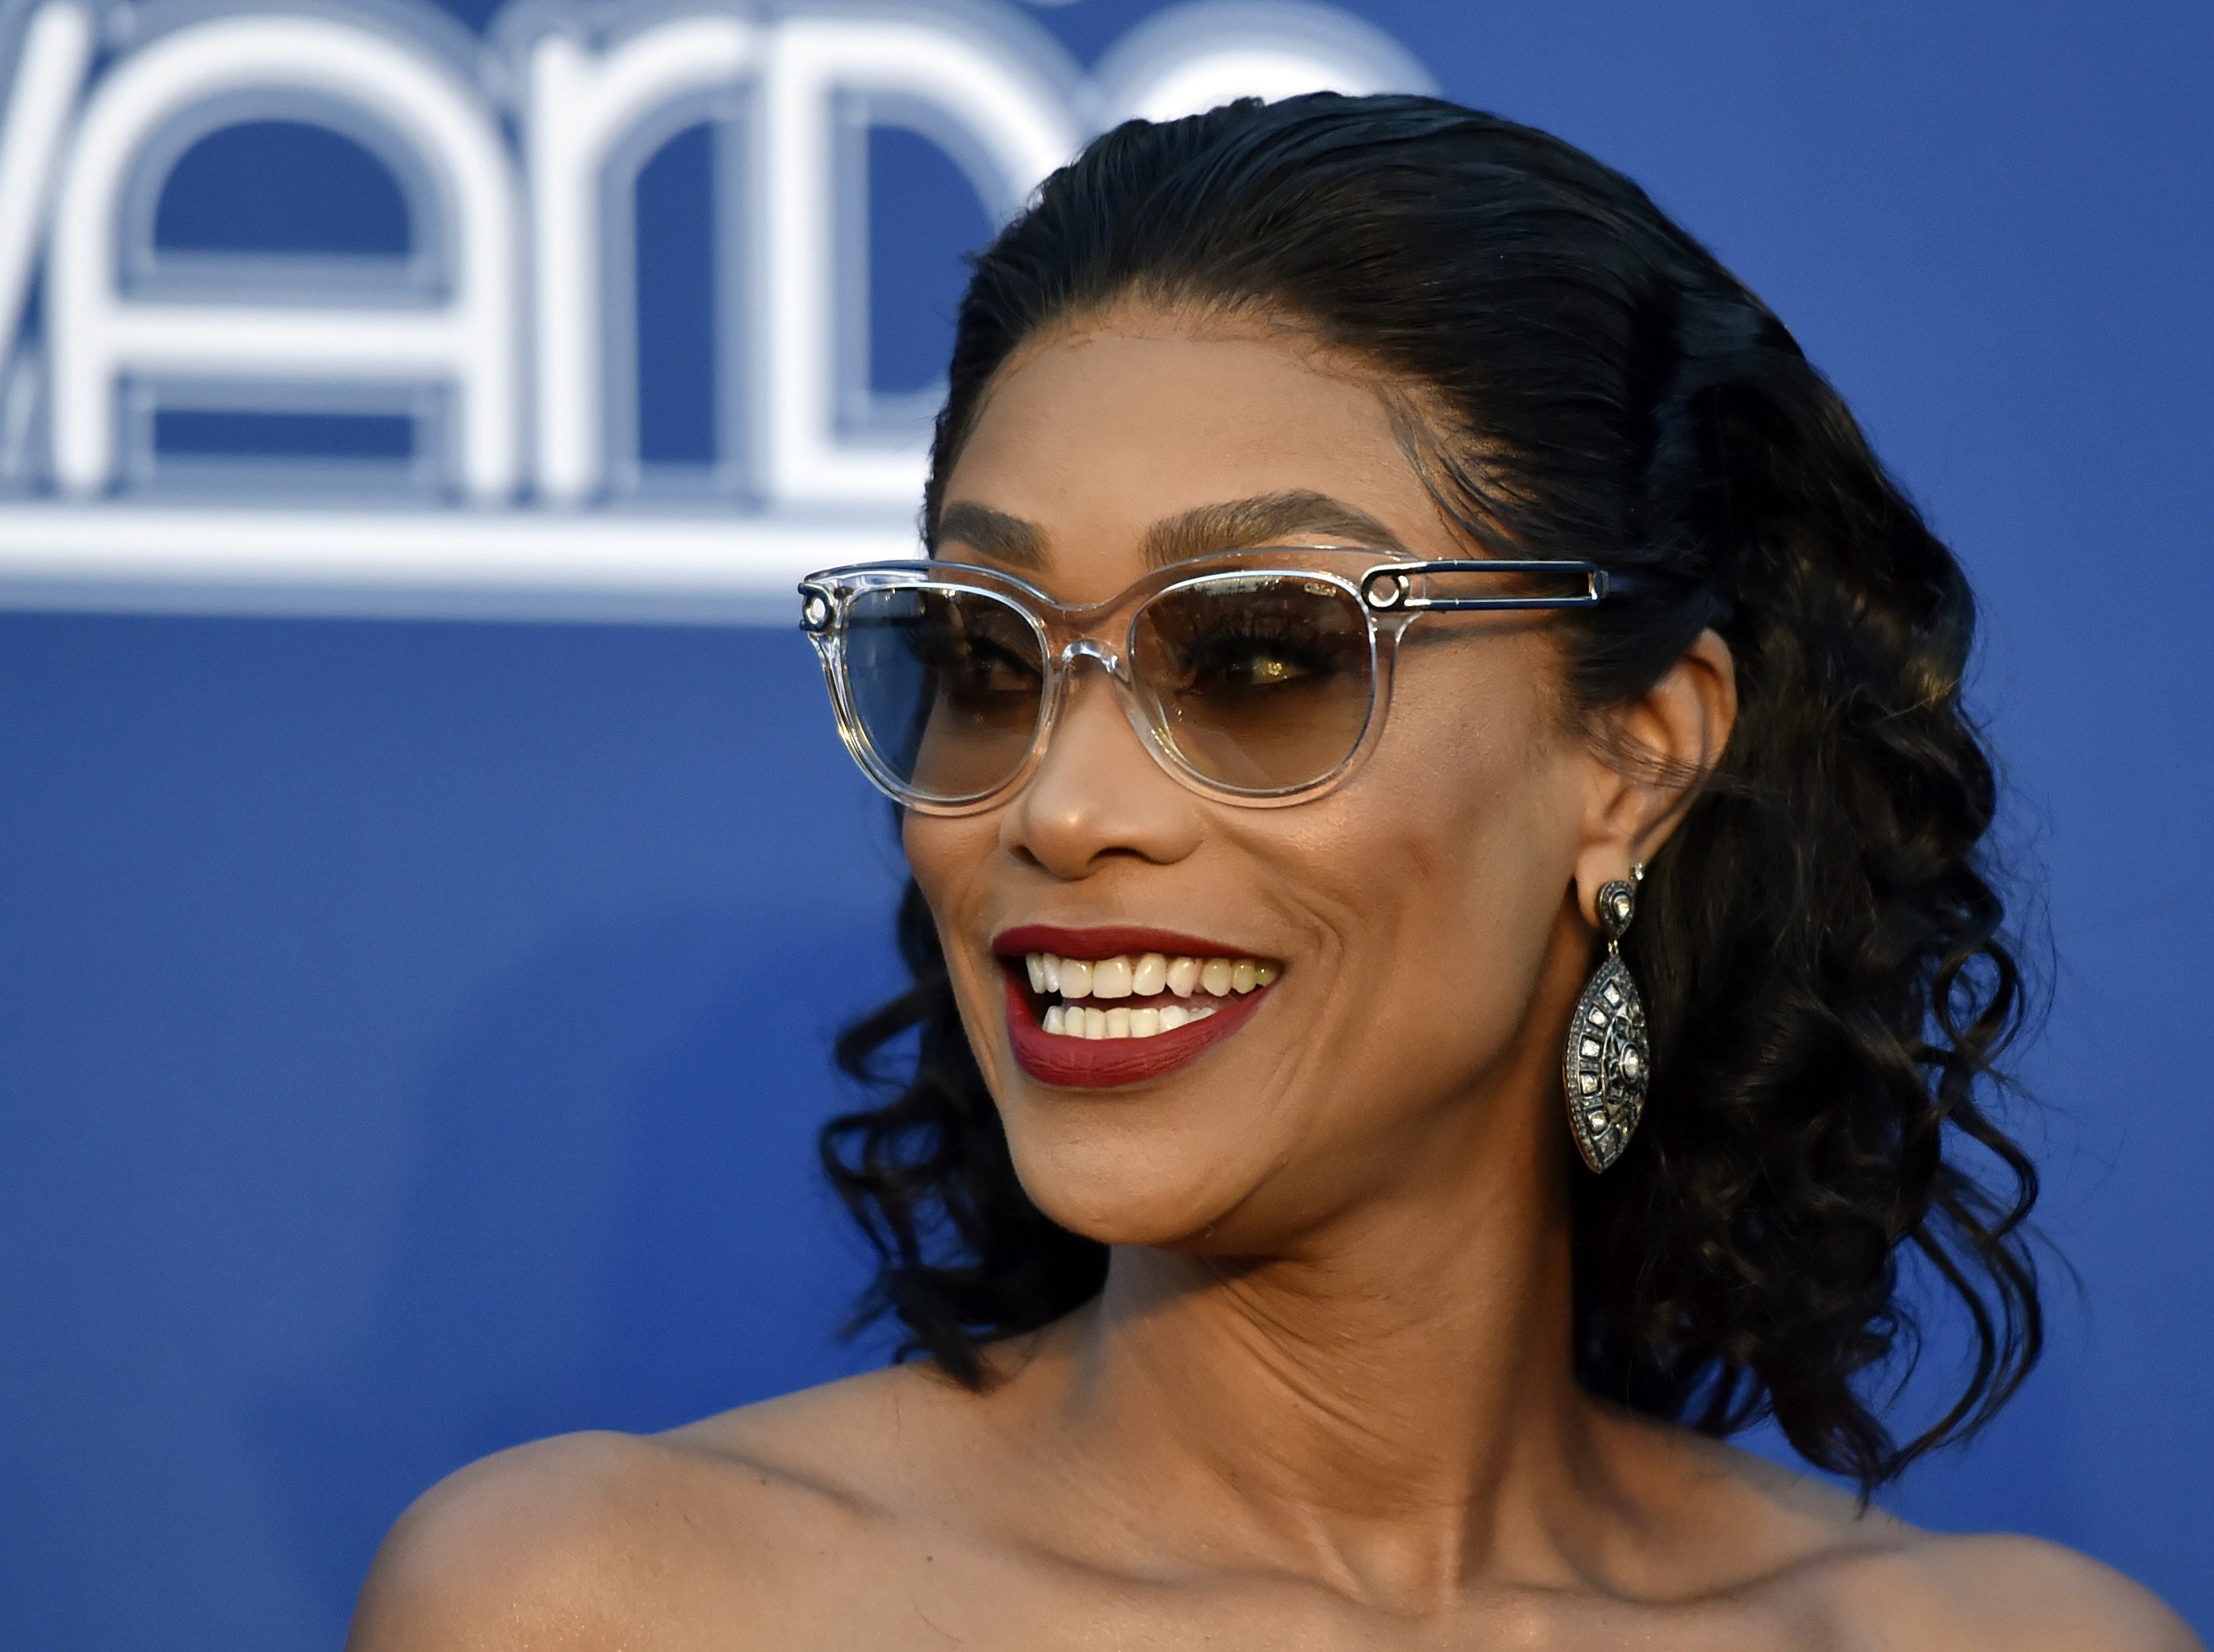 Tami Roman at the Soul Train Awards on Nov. 17, 2018 in Las Vegas, Nevada | Photo: Getty Images